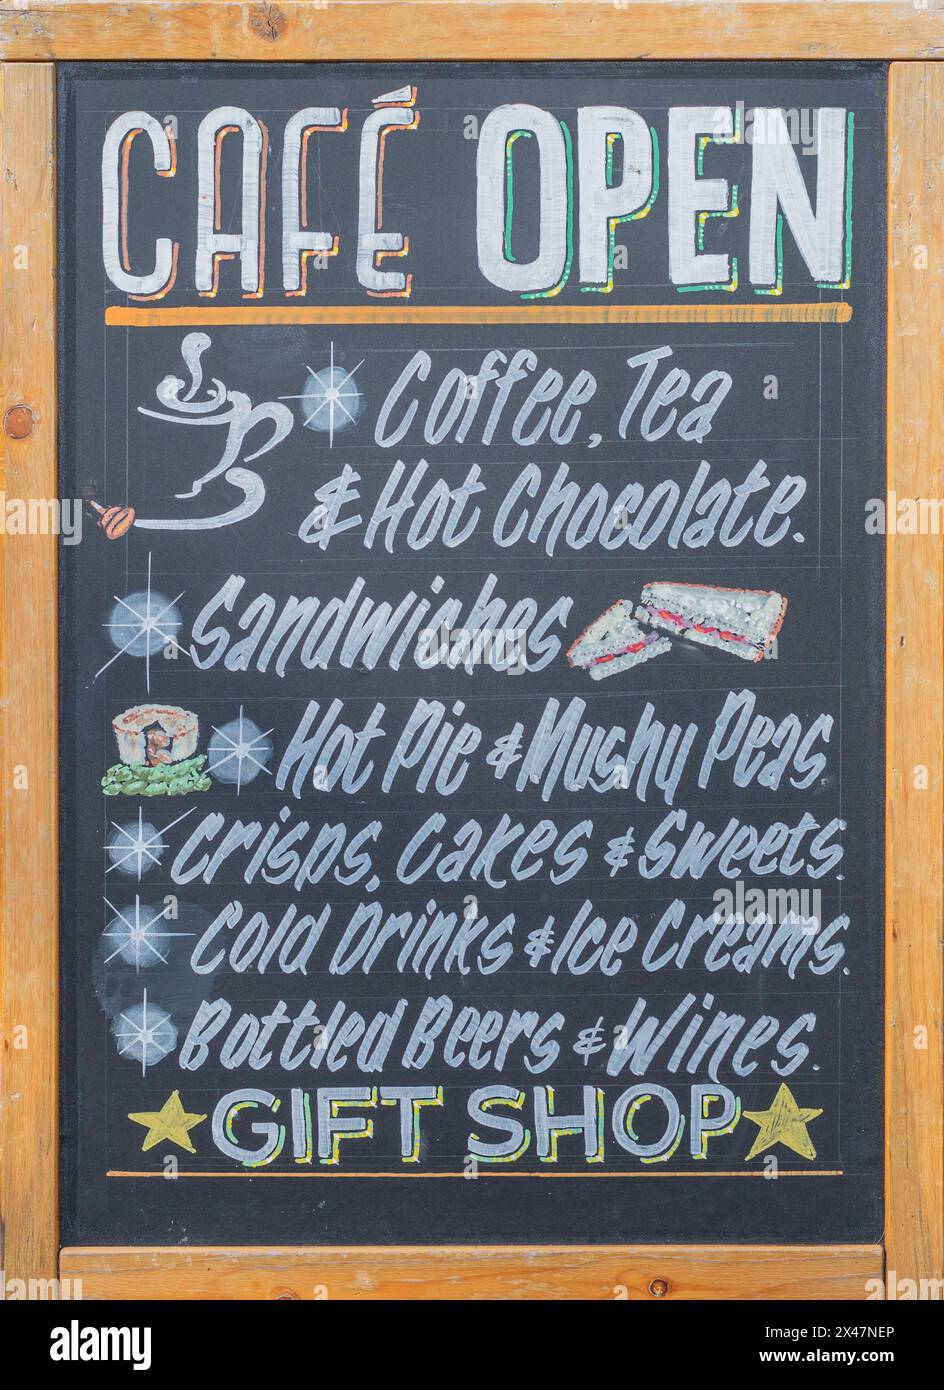 Cafe Open sign on black board surrounded by wood frame advertising various items Stock Photo